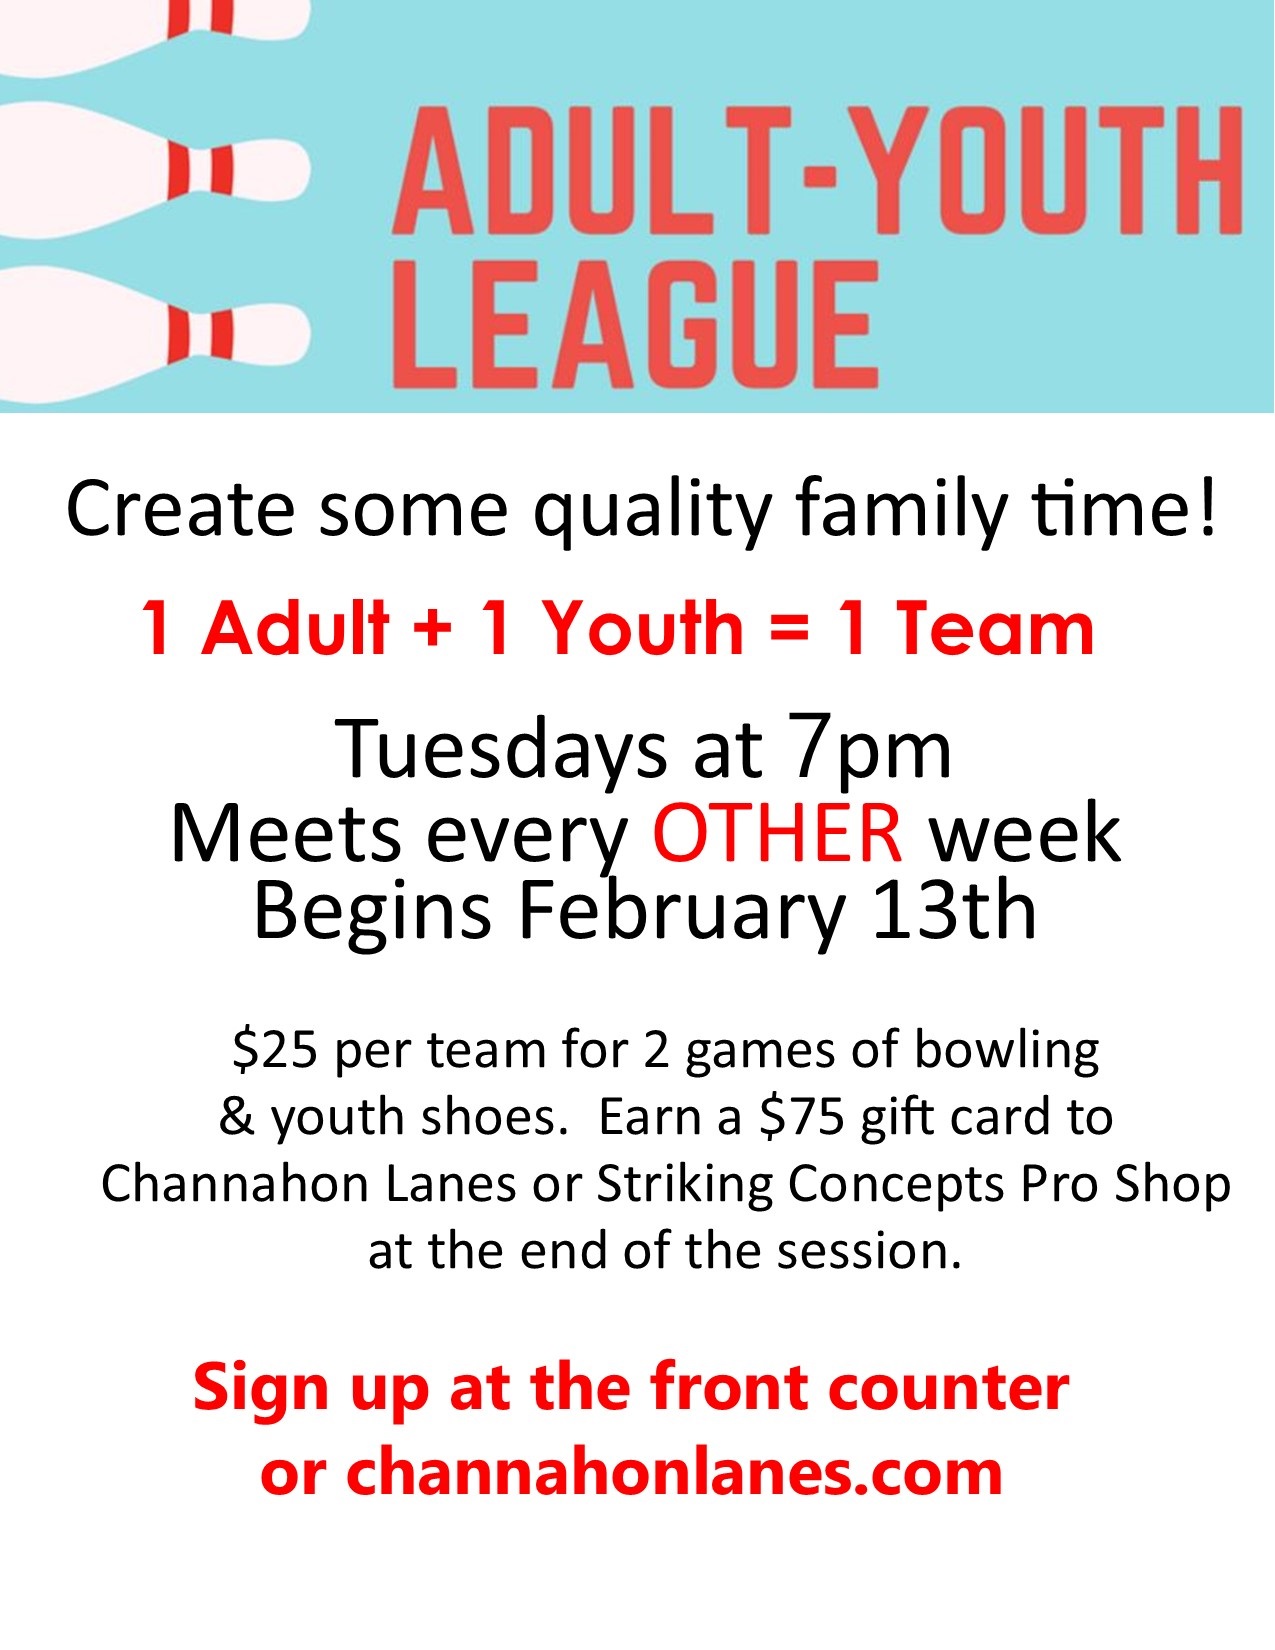 Youth Bowling Leagues